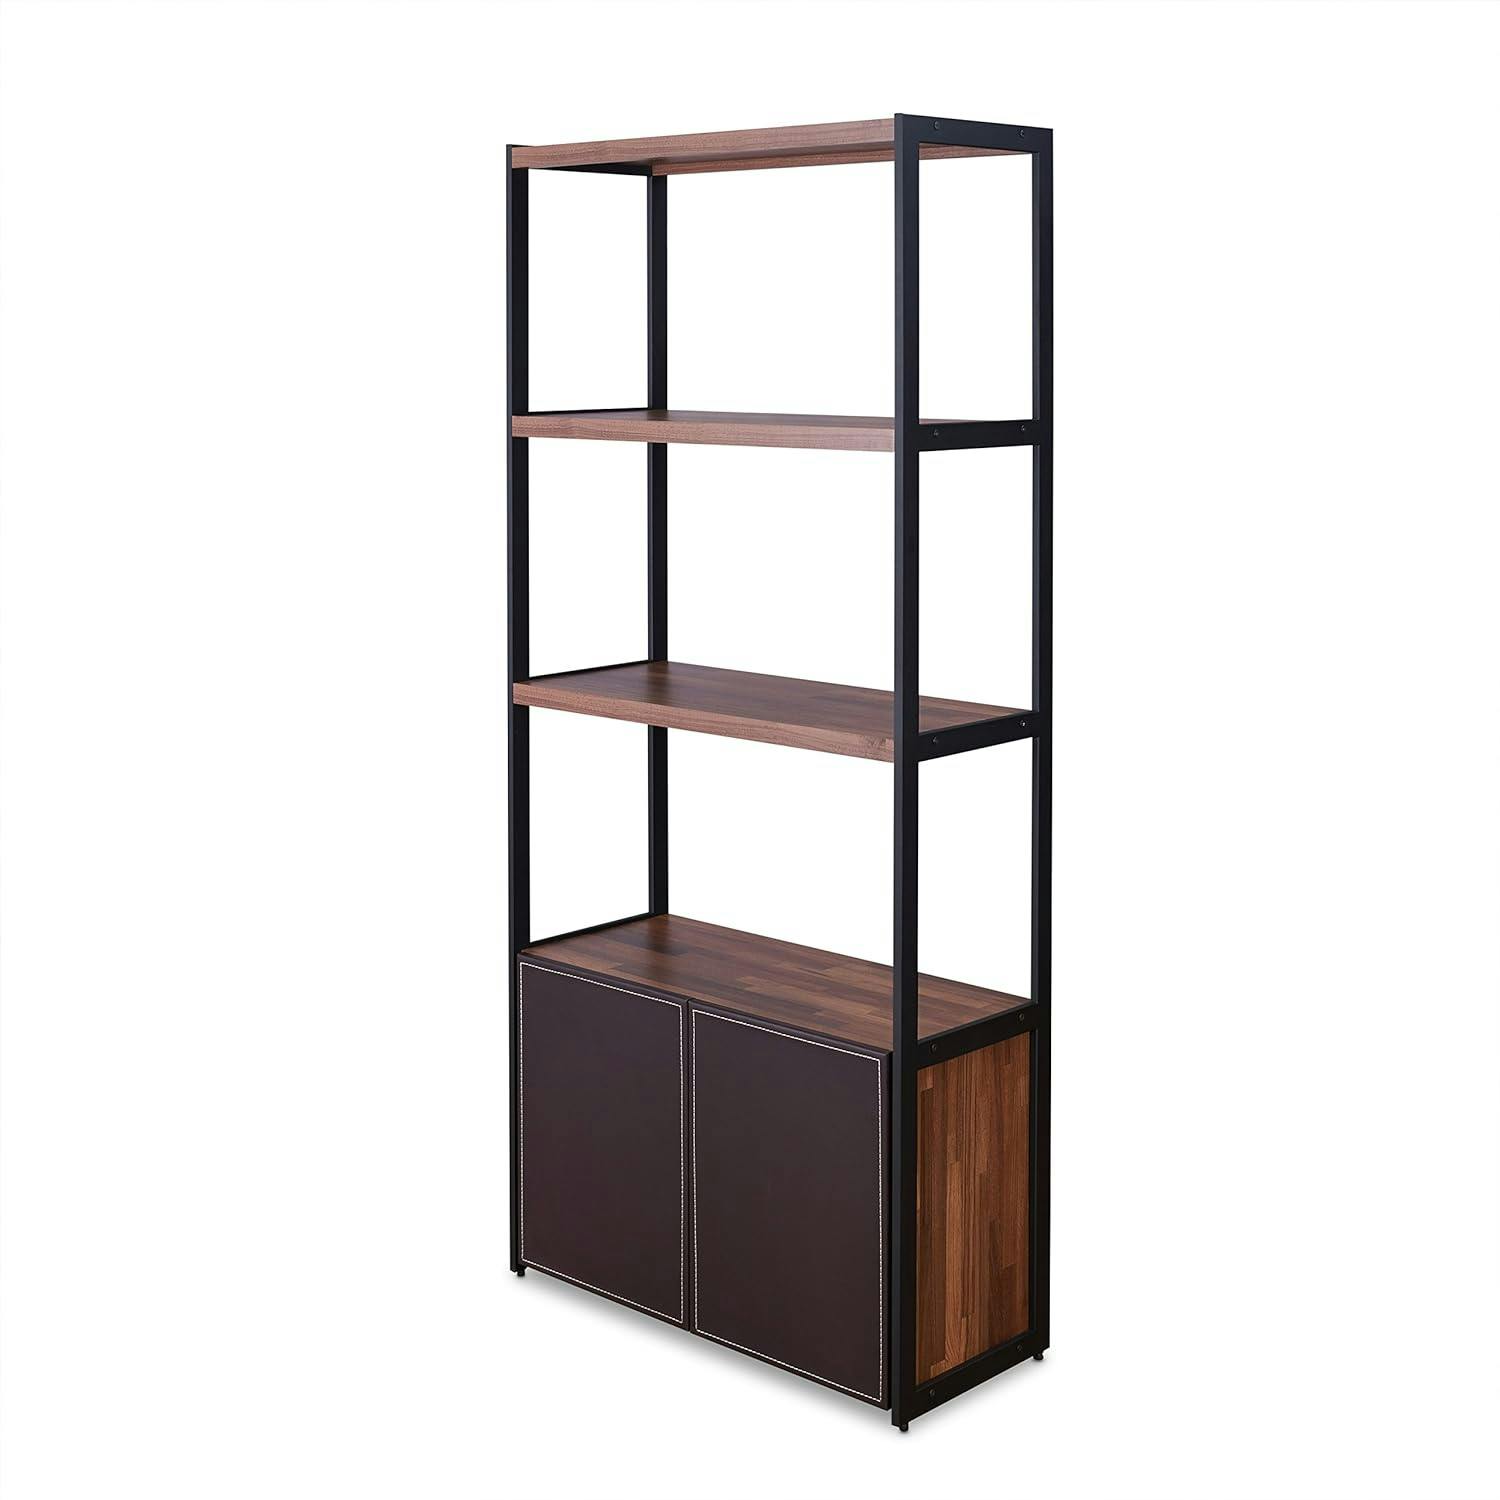 Modern Black Wood Bookcase with Faux Leather Doors, 32"x70"